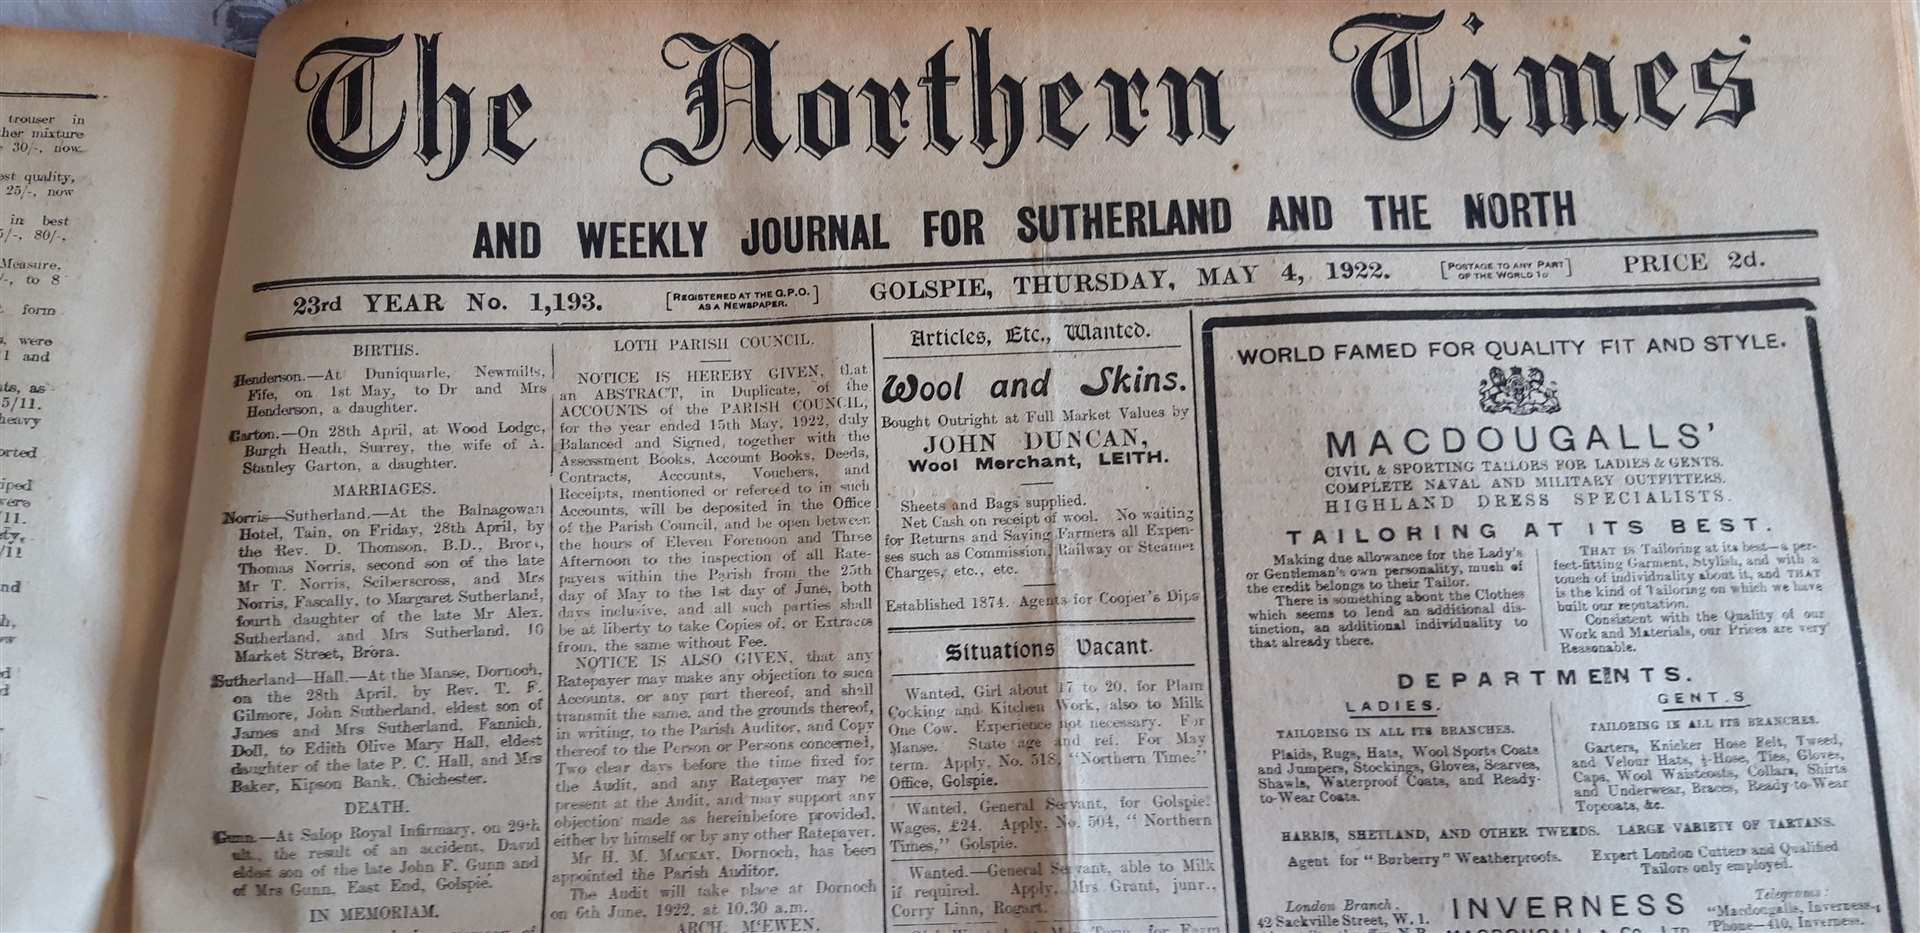 The newspaper of May 4, 1922.